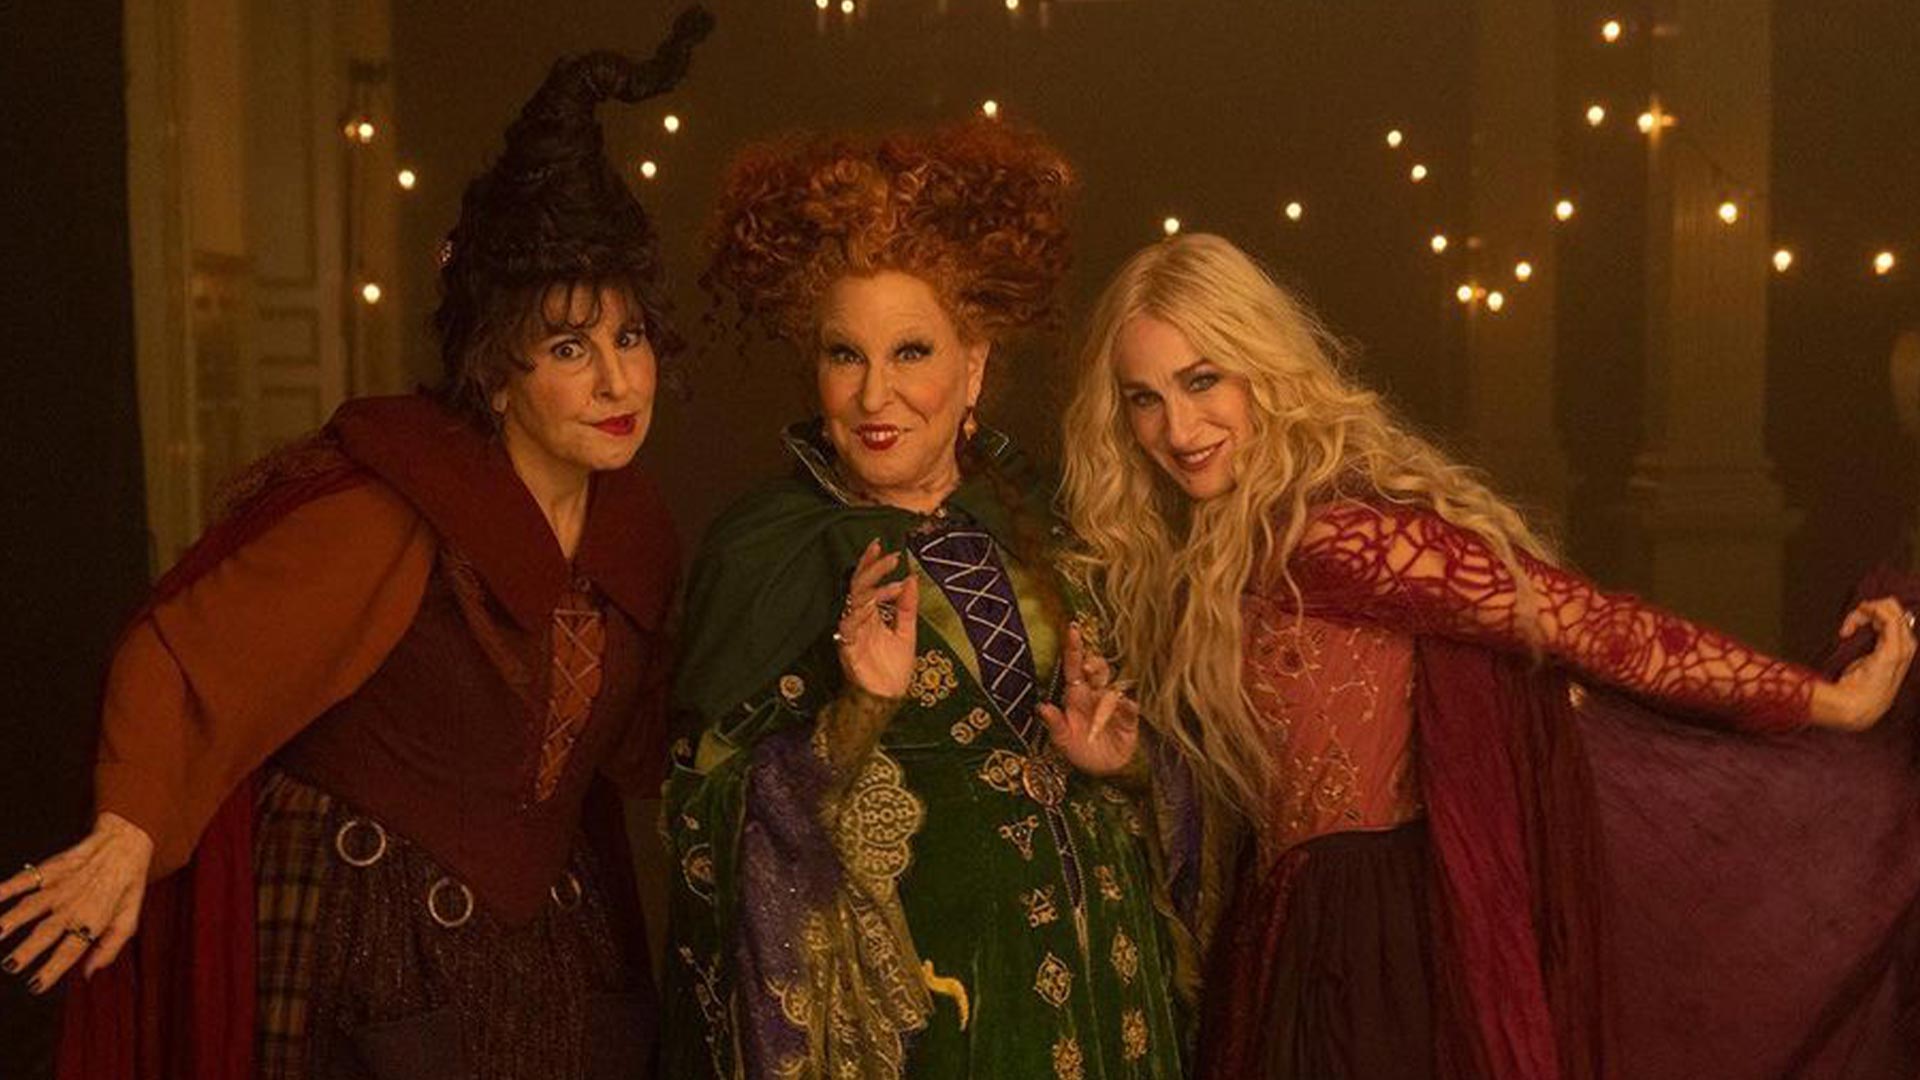 Hocus Pocus 2' Shares First Look at Bette Midler, Sarah Jessica Parker and Kathy Najimy